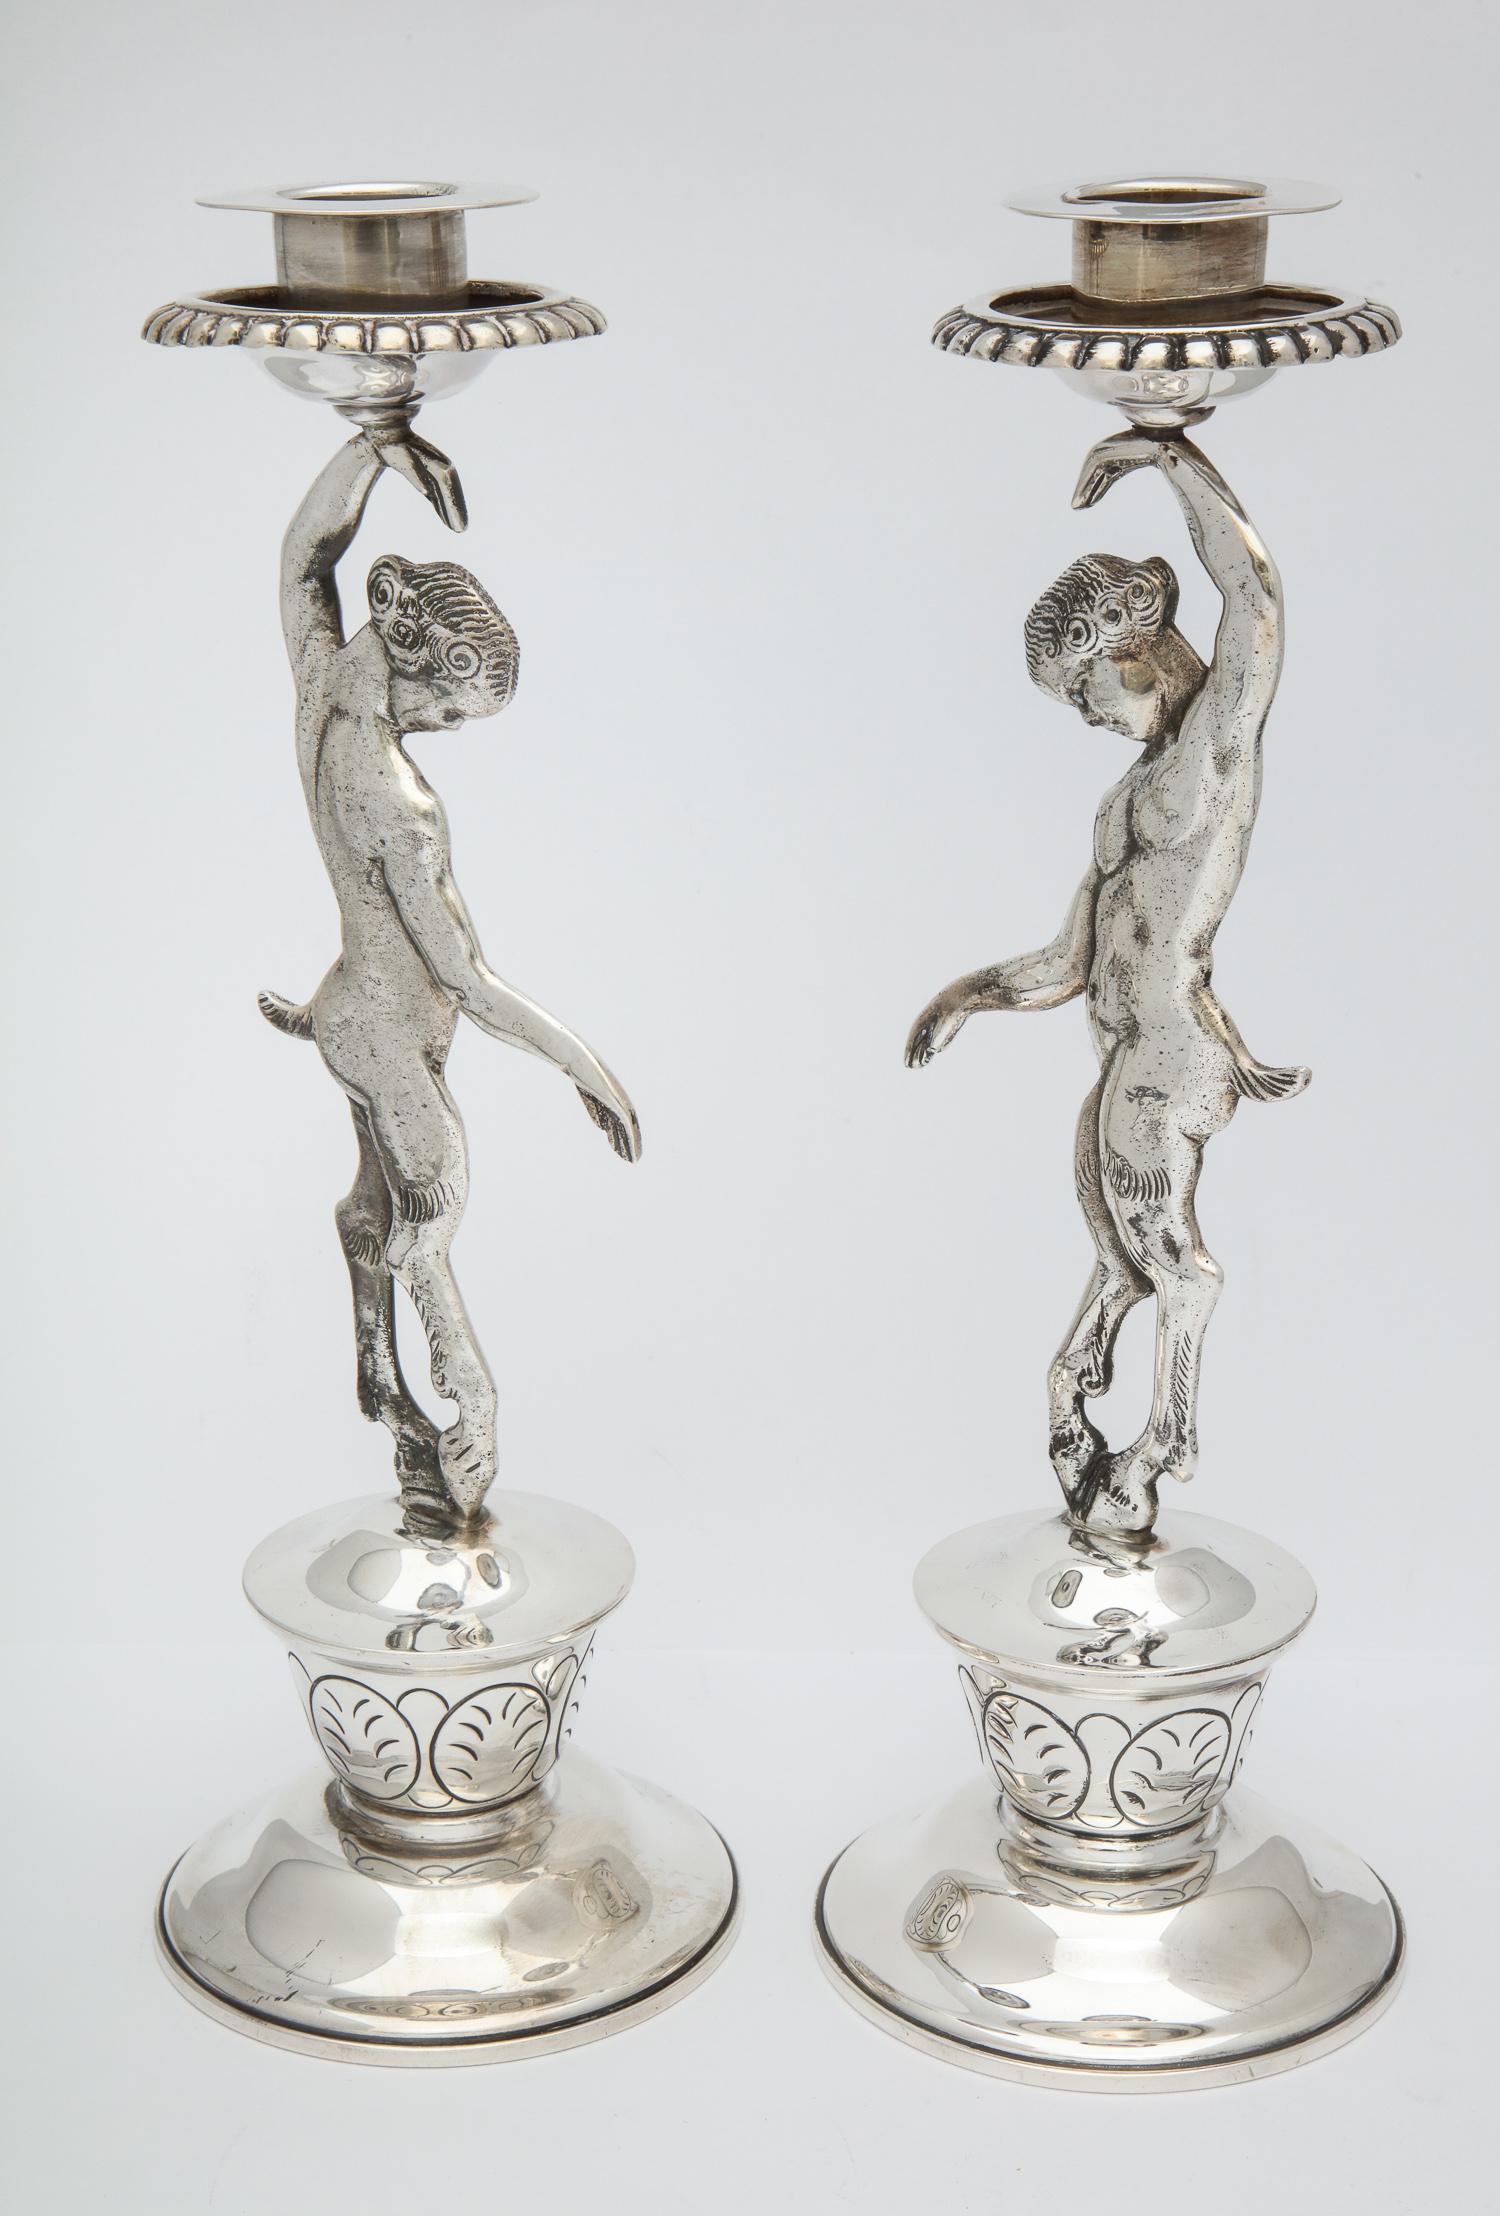 Rare Pair of Midcentury Sterling Silver Mexican Satyr-Form Candlesticks 1